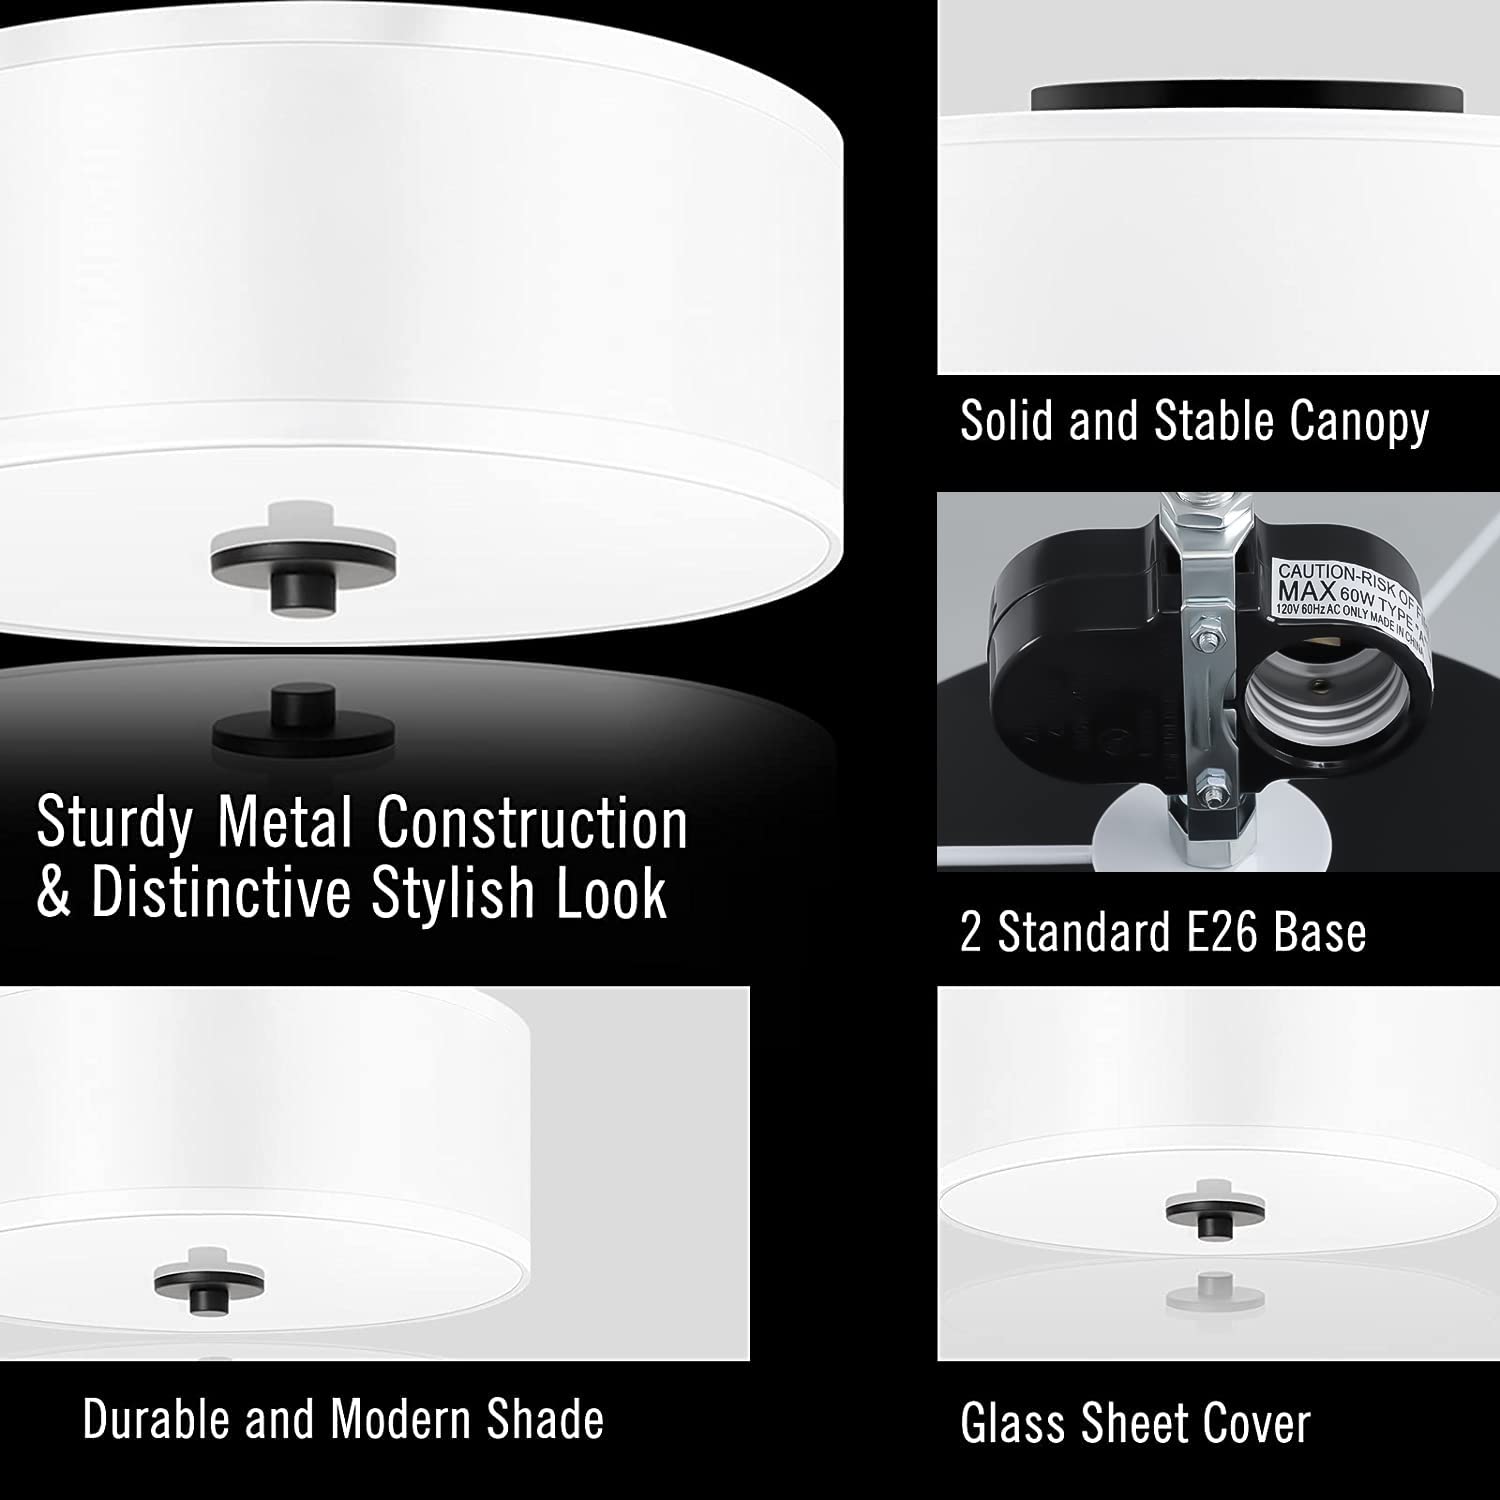 Lodstob 2-Light Flush Mount Ceiling Light Fixture, 12” Modern Close to Ceiling Light with White Fabric Linen Drum Shade, Round Ceiling Light for Bedroom Hallway Living Room Bathroom Dining Kitchen